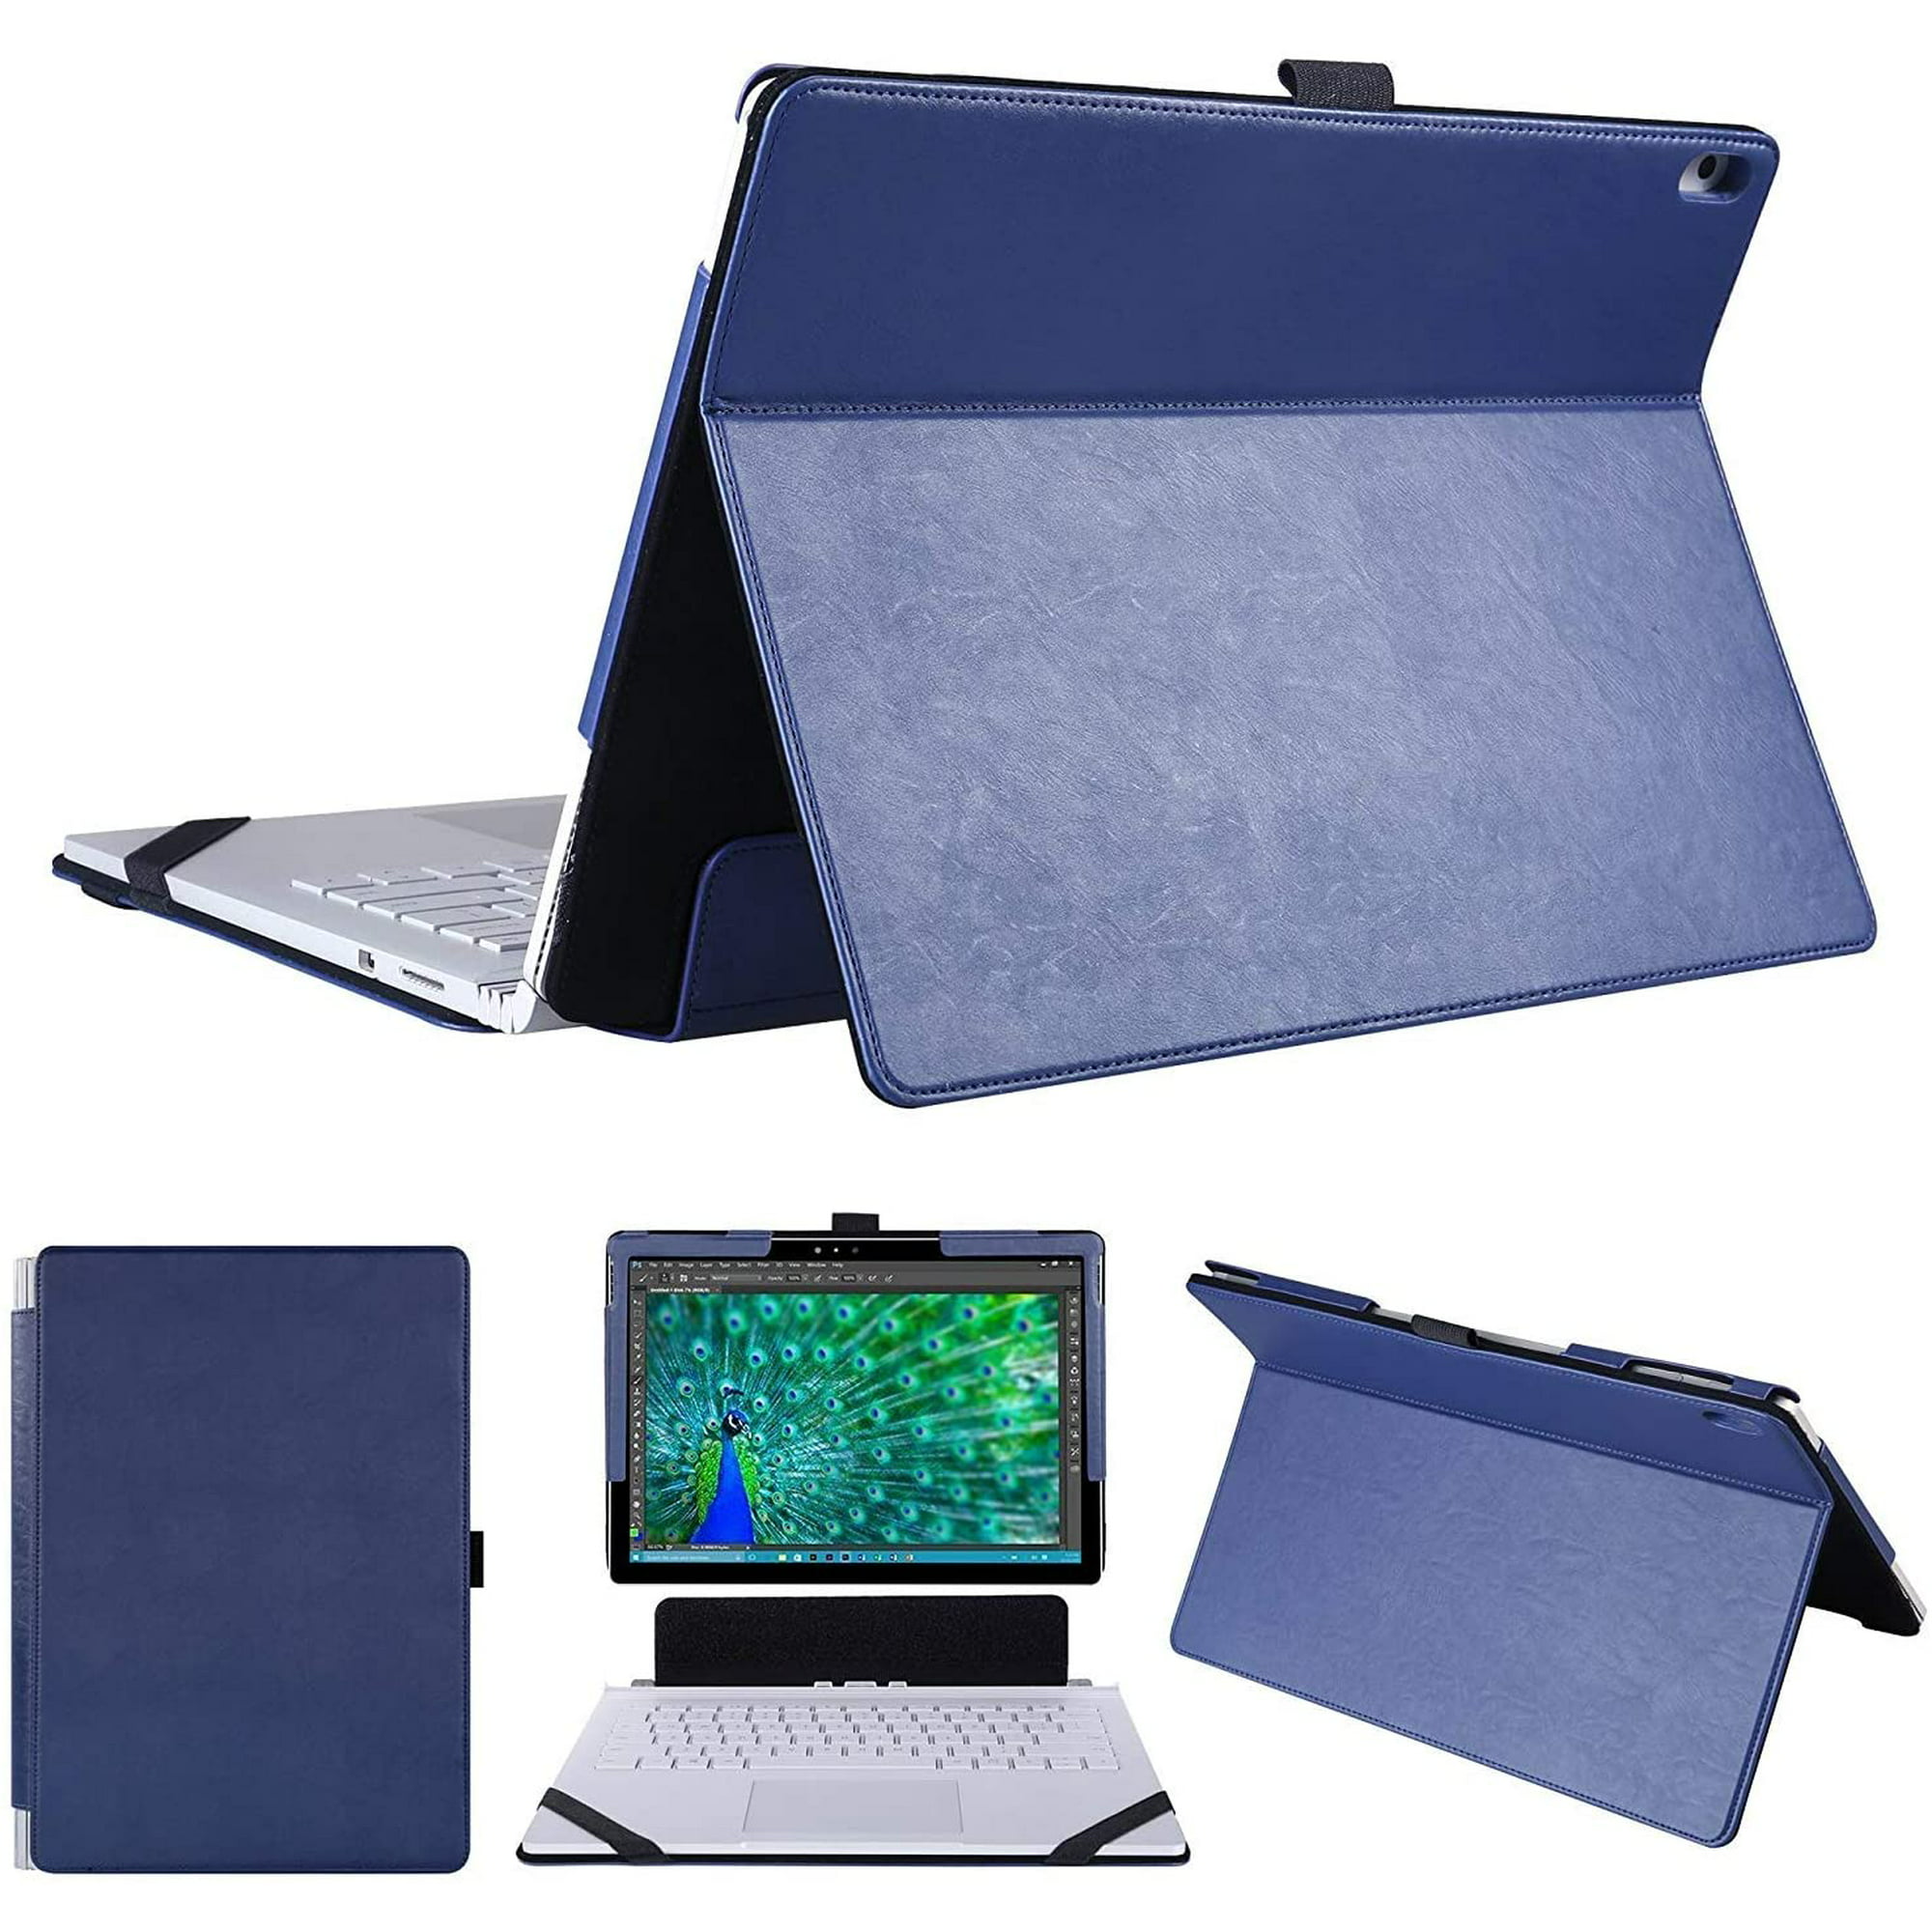 HoYiXi Case for Microsoft Surface Book 3 & 2, 2 in 1 Kickstand